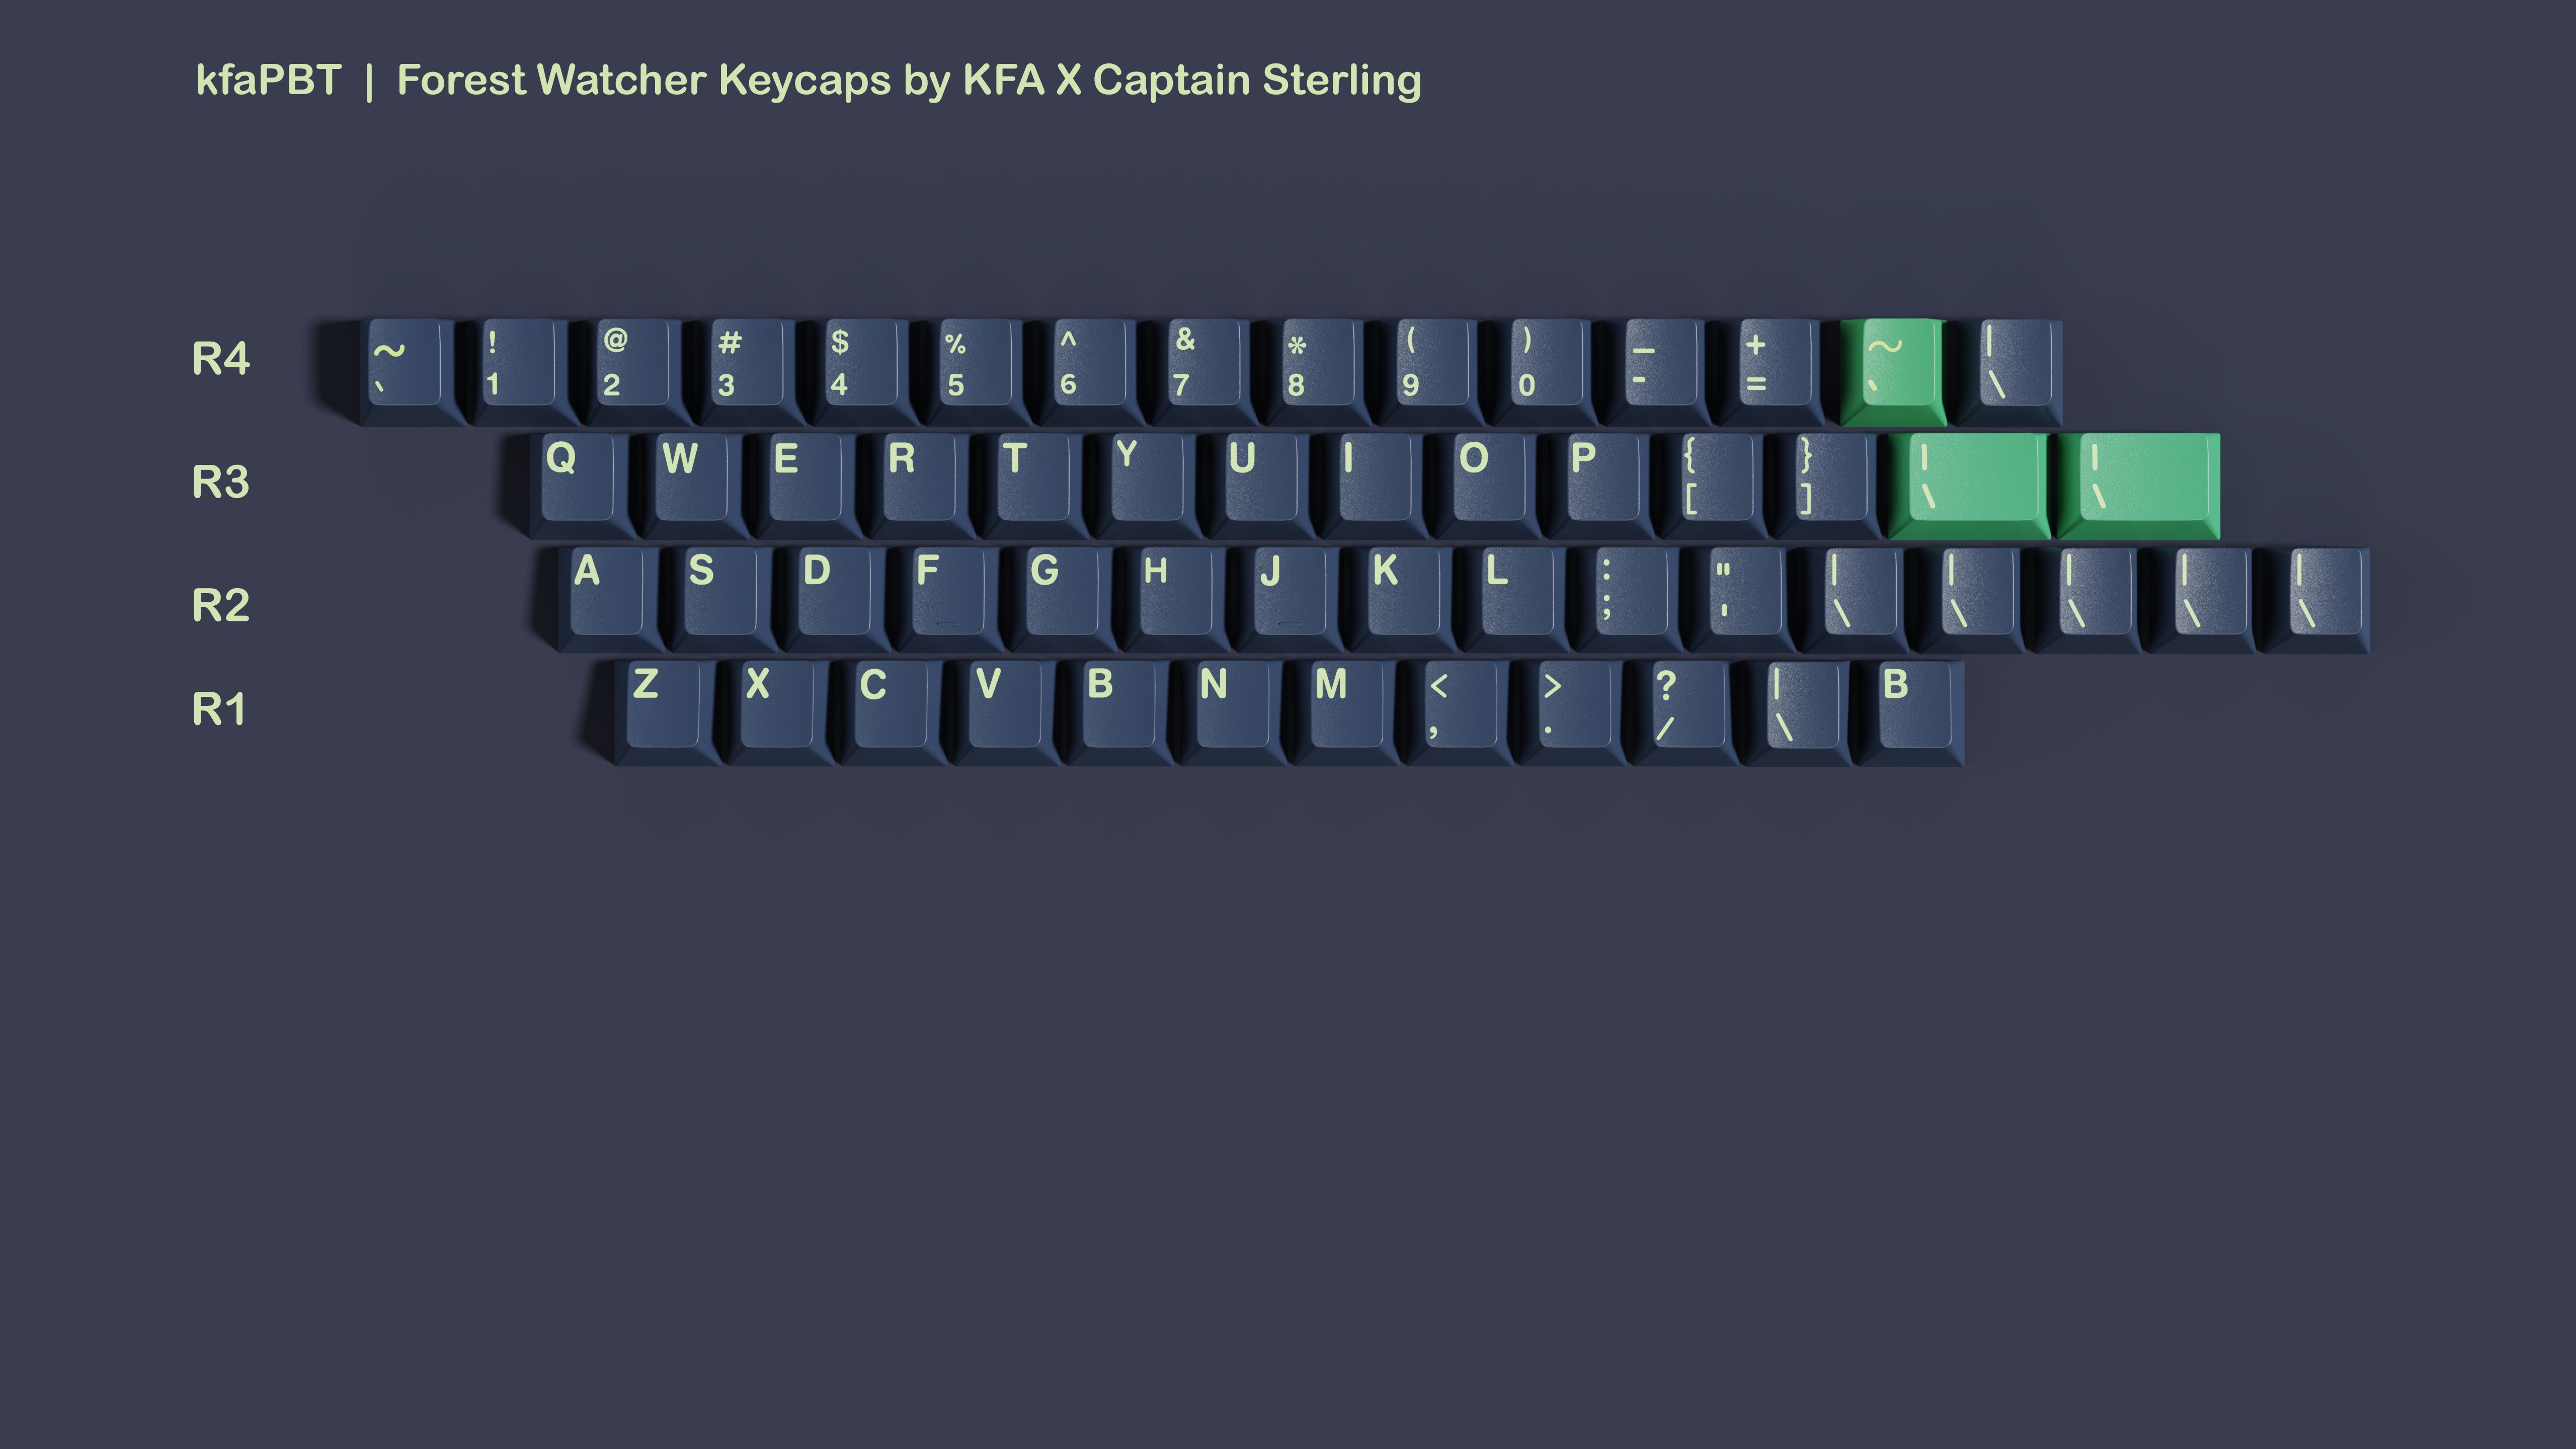 kfaPBT Forest Watcher keycaps alphas kit for anyone who wants to personalize their mechanical keyboard without the sub-legends. 